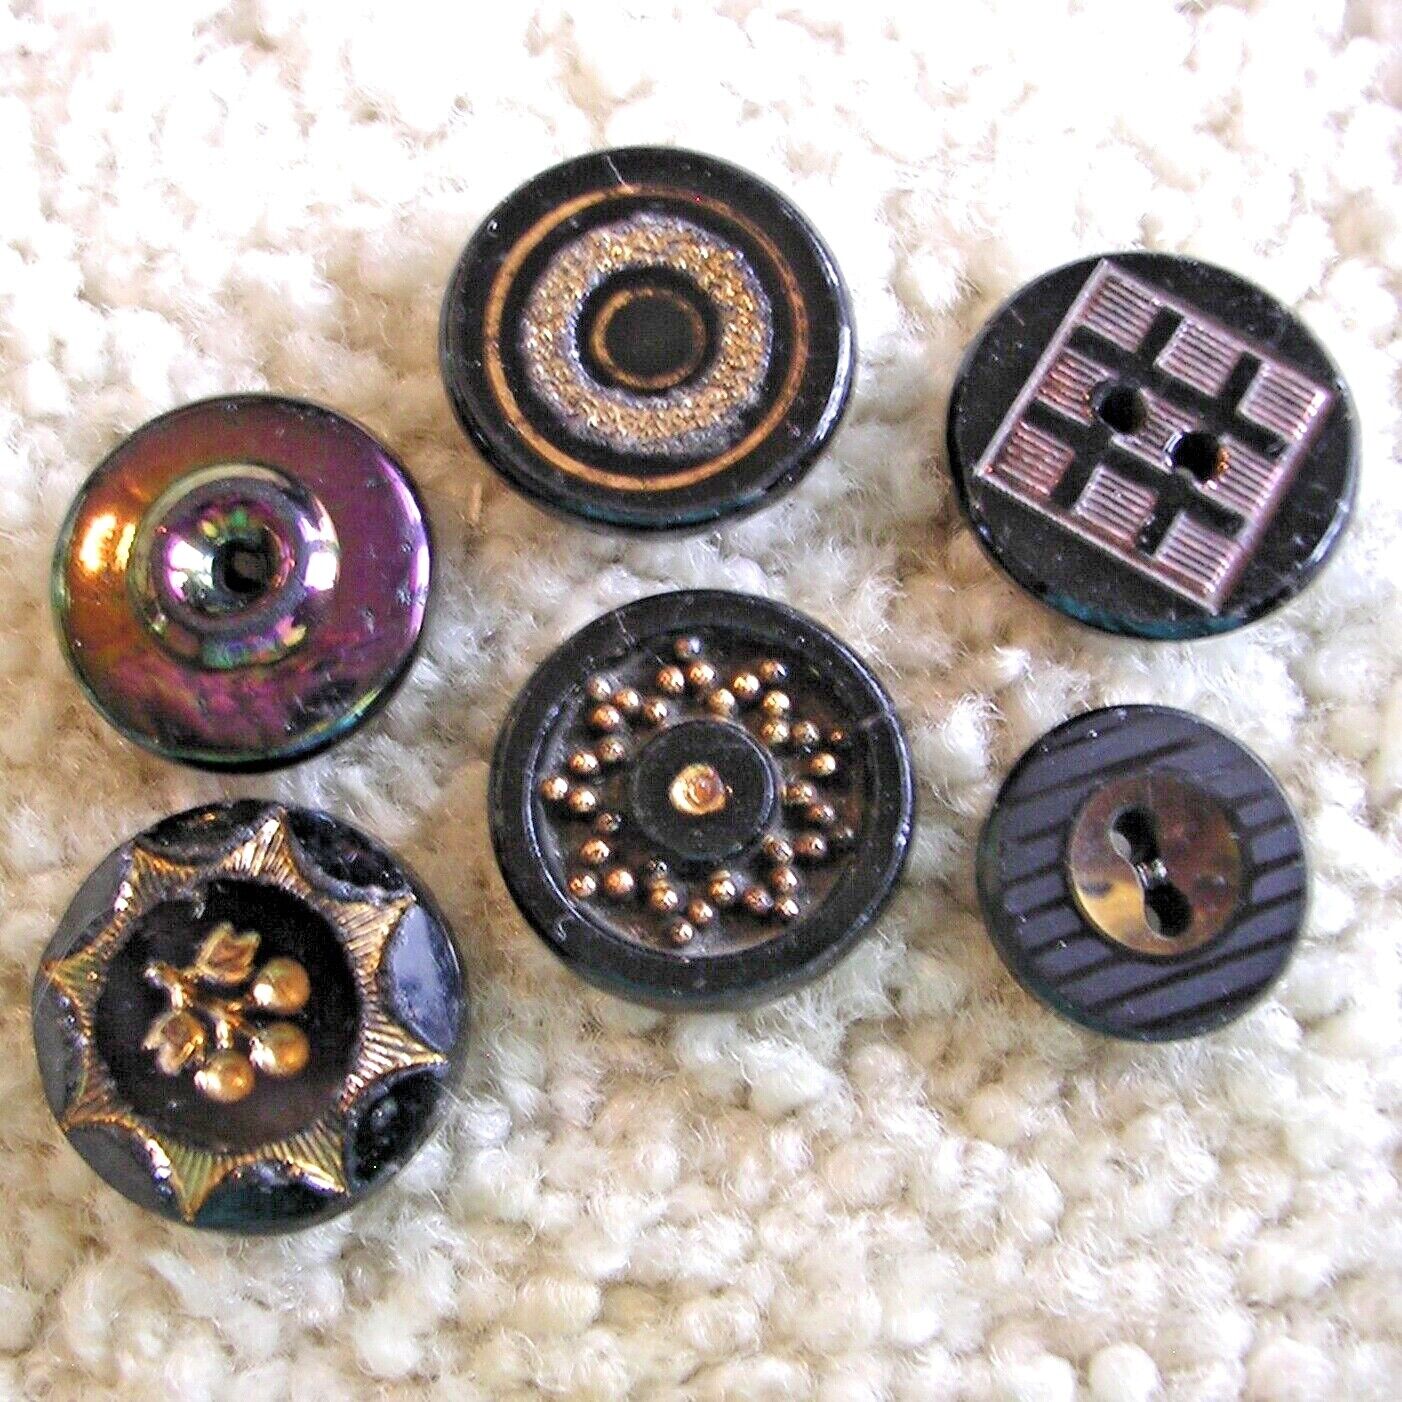 6 Sparkling antique black glass buttons w/metallic gold luster accents